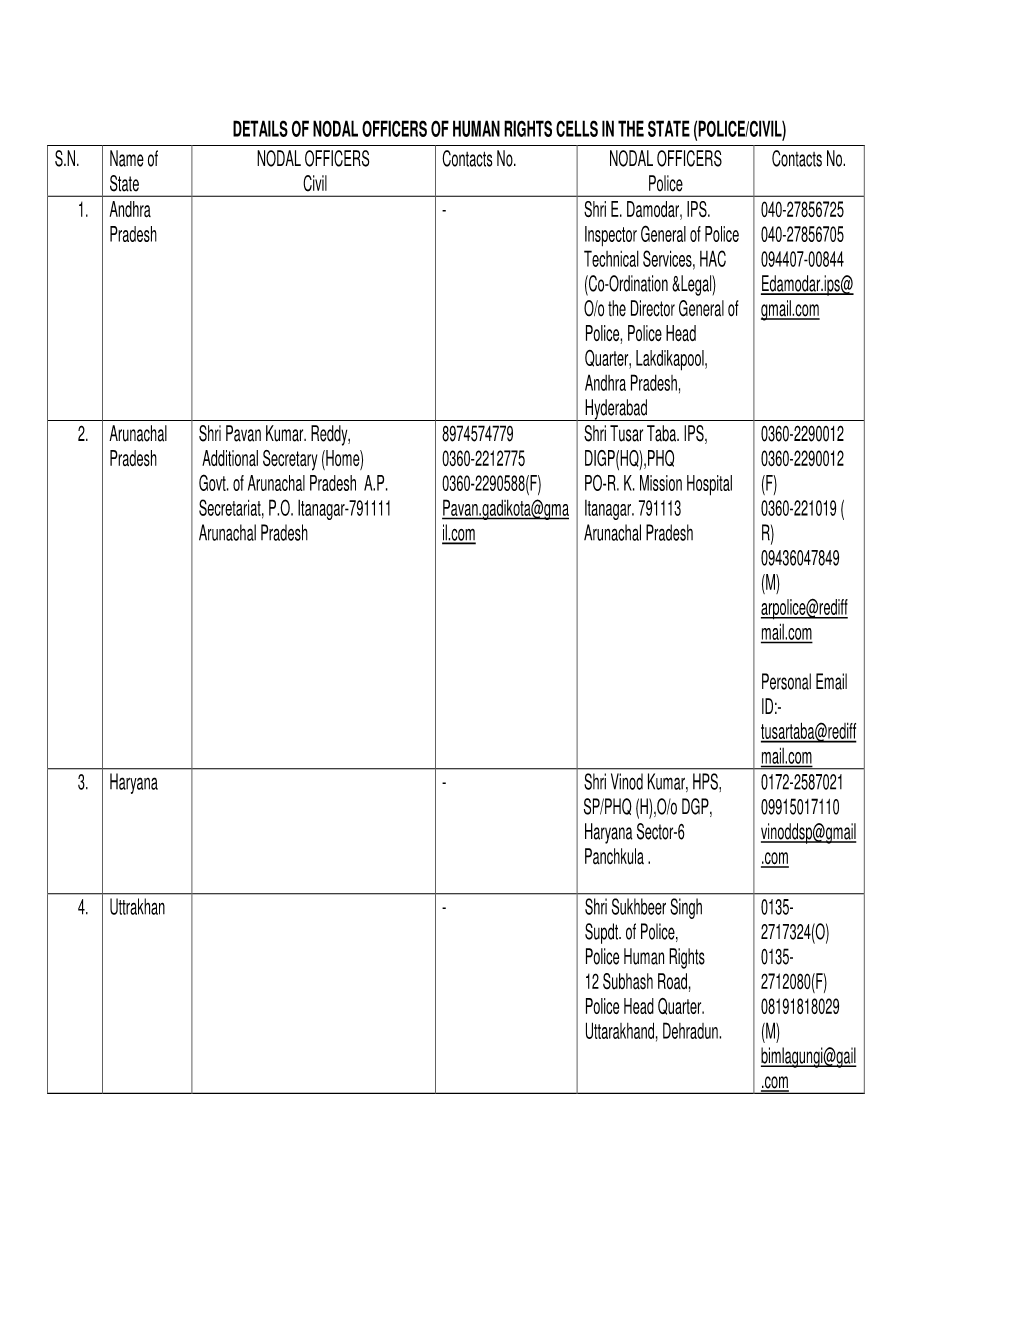 Details of Nodal Officers of Human Rights Cells in the State (Police/Civil) S.N